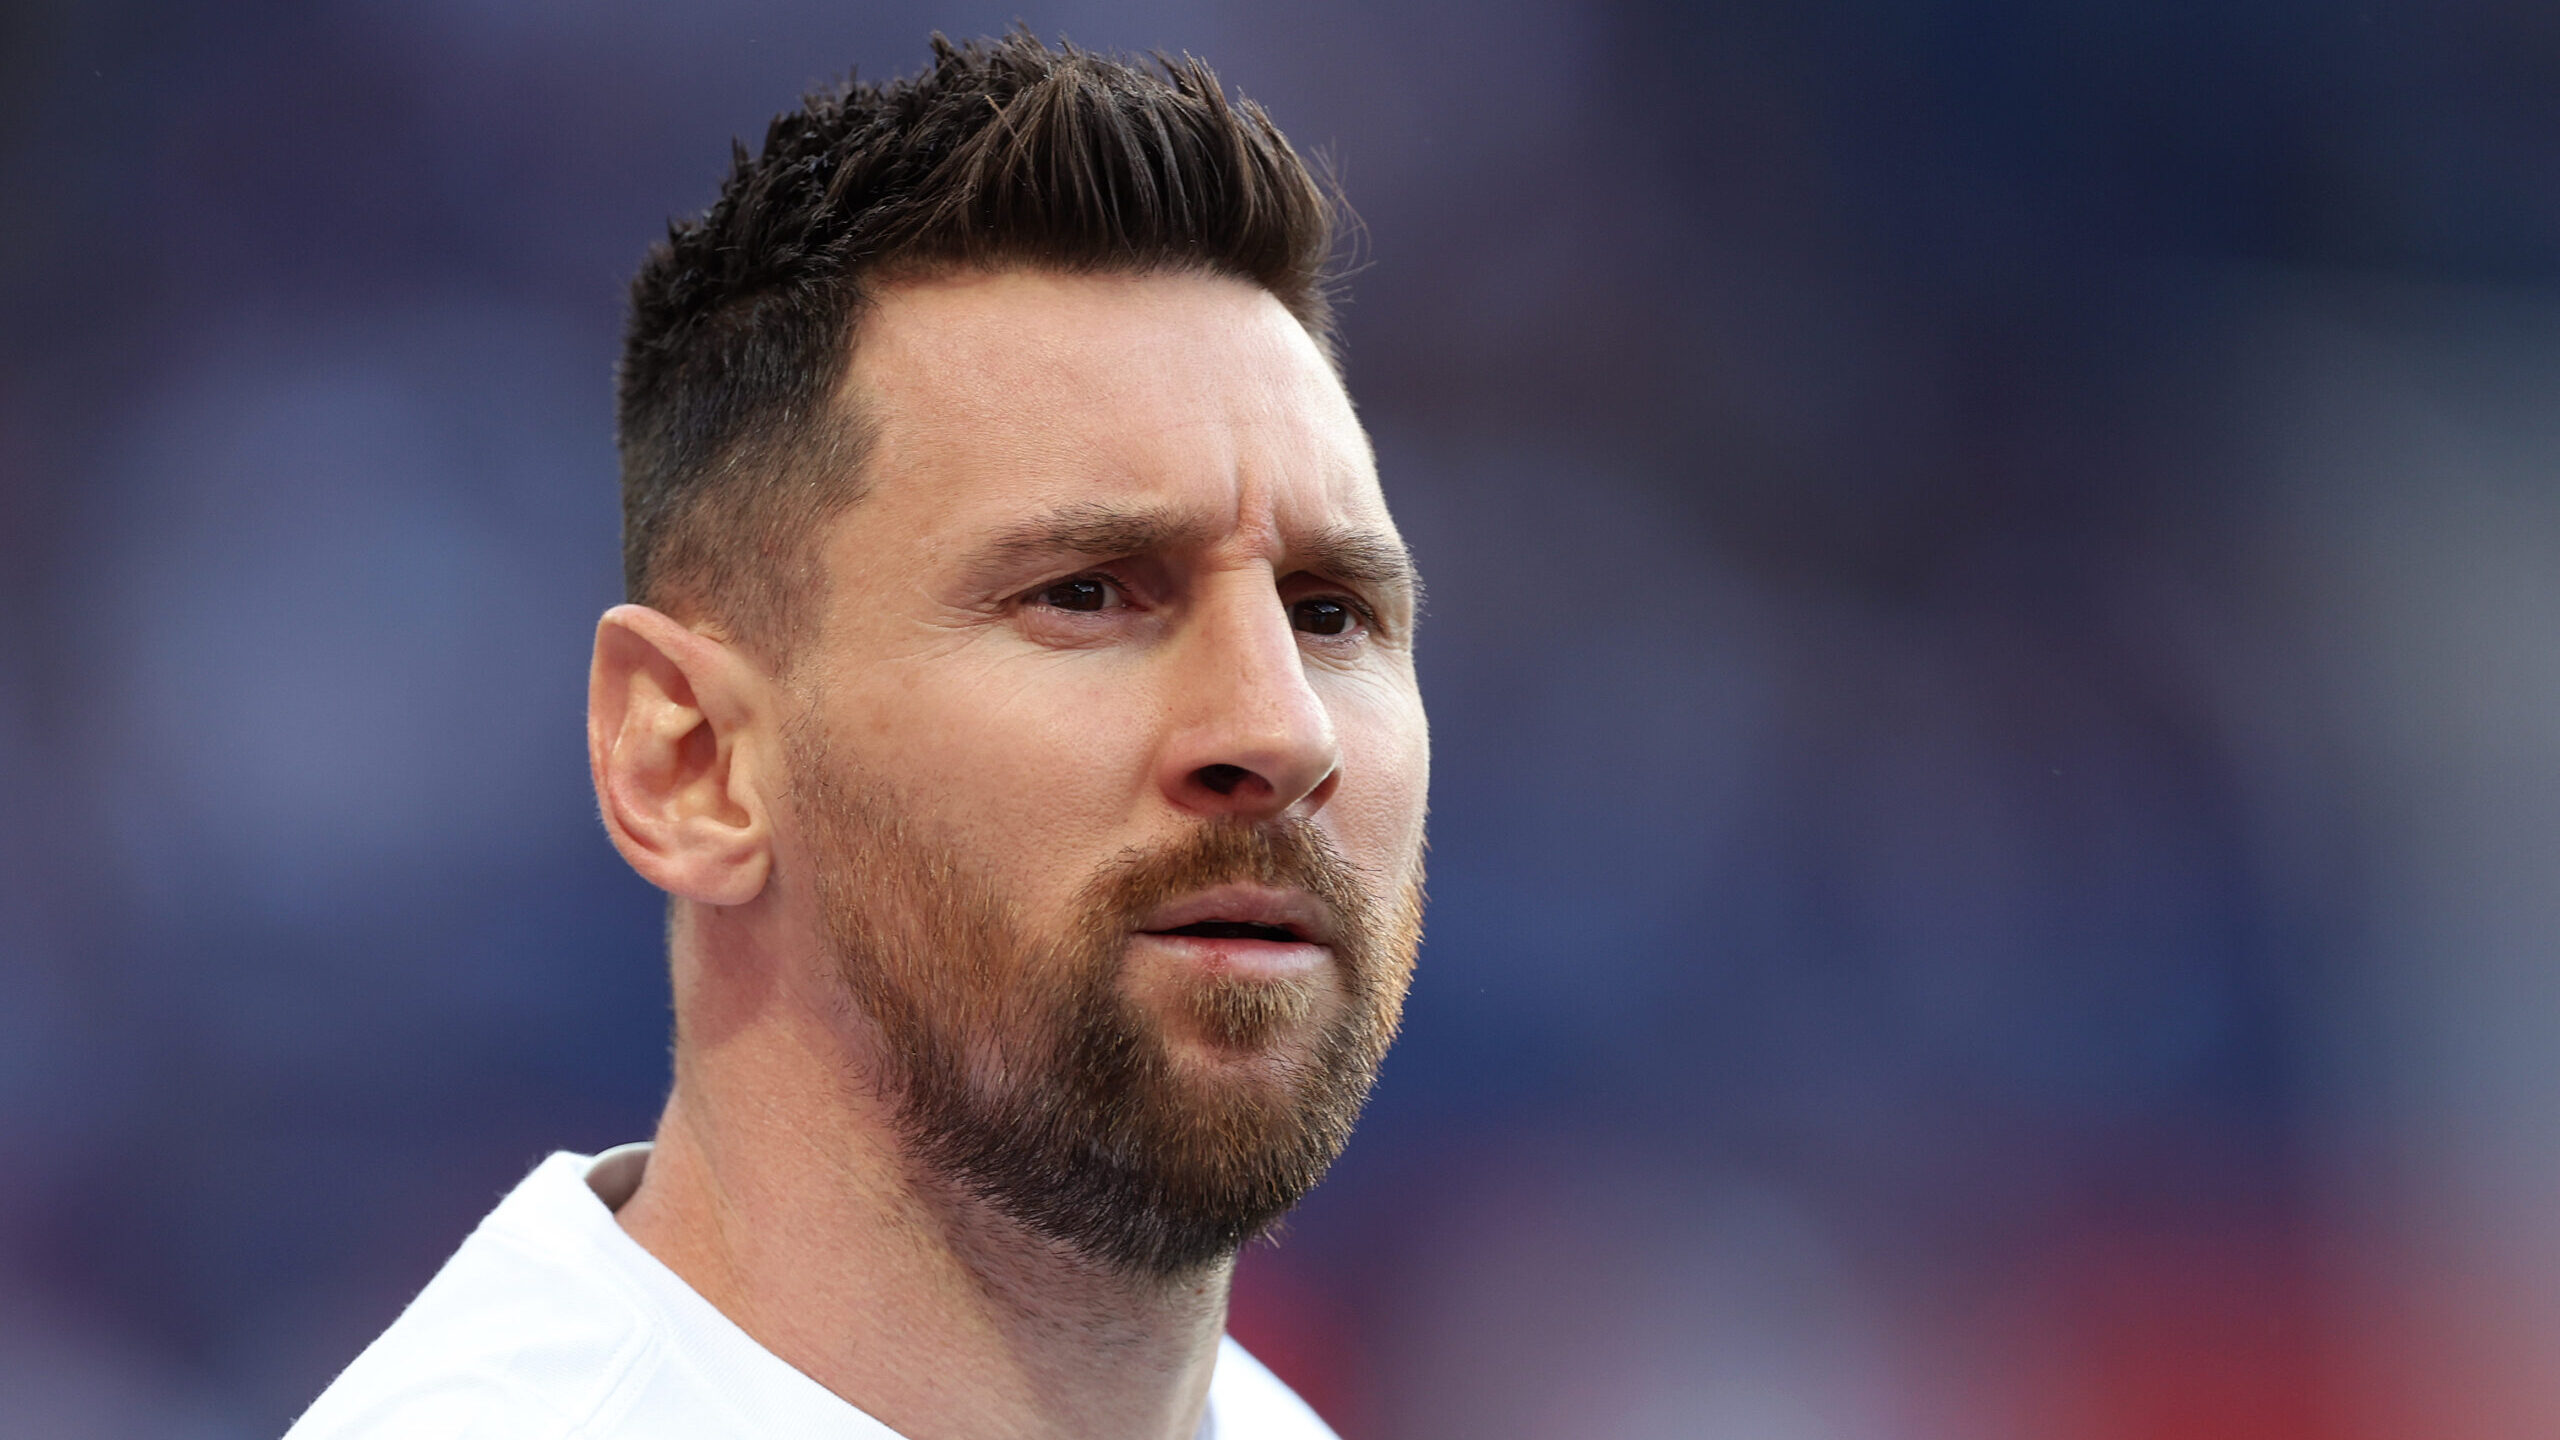 When Could Lionel Messi Play Real Salt Lake In Utah?